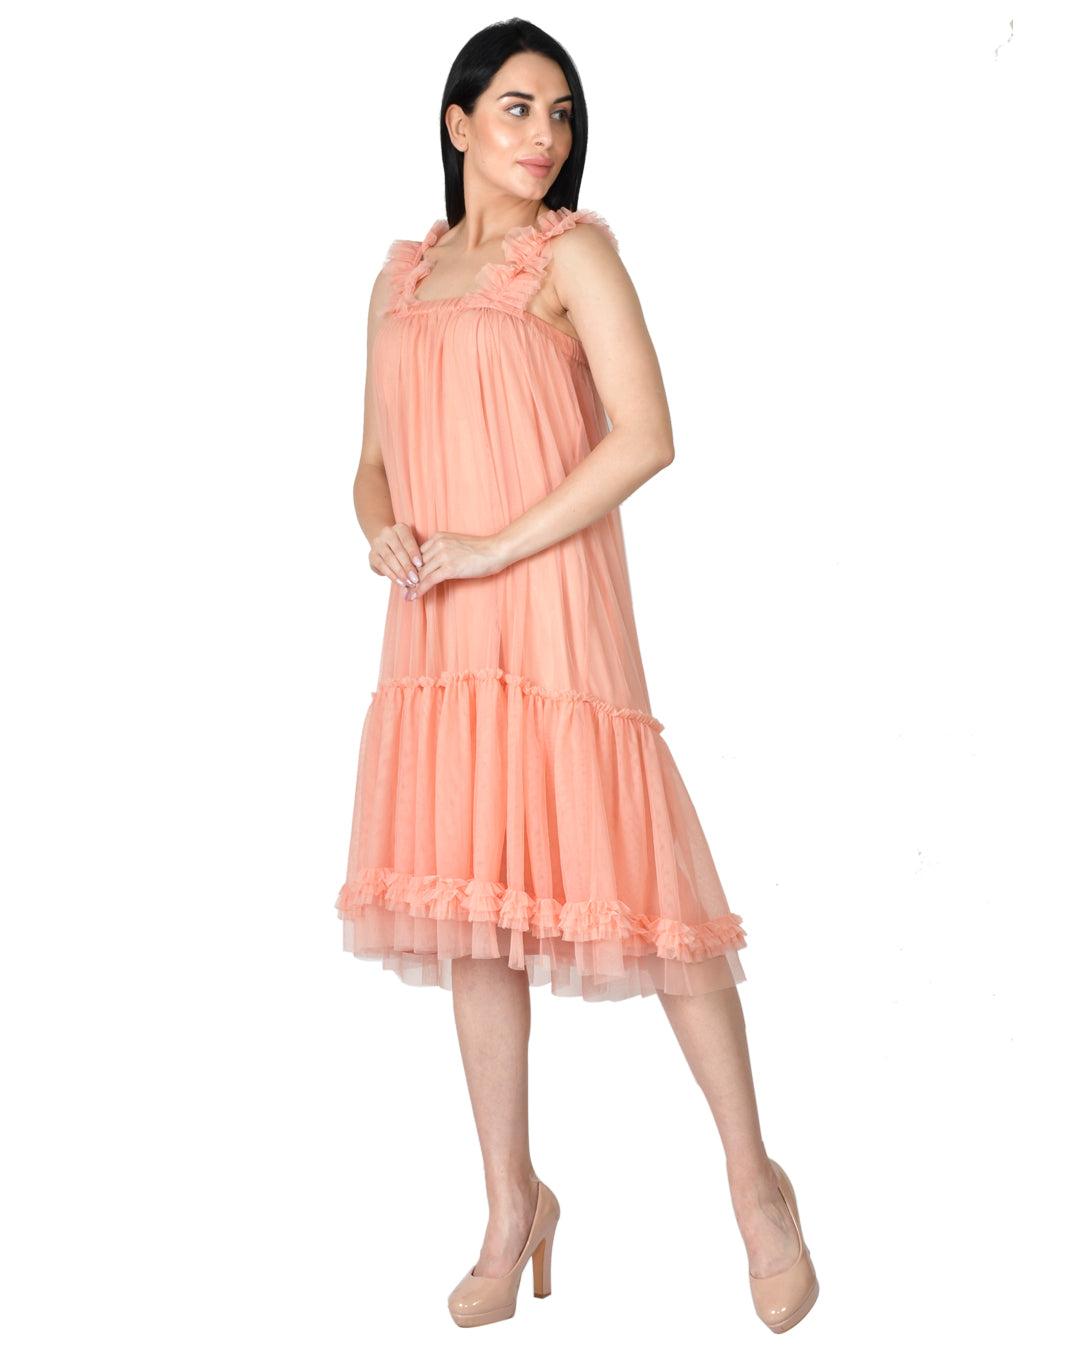 FRILLY PARTY TWINNING DRESS IN A SOFT PEACH